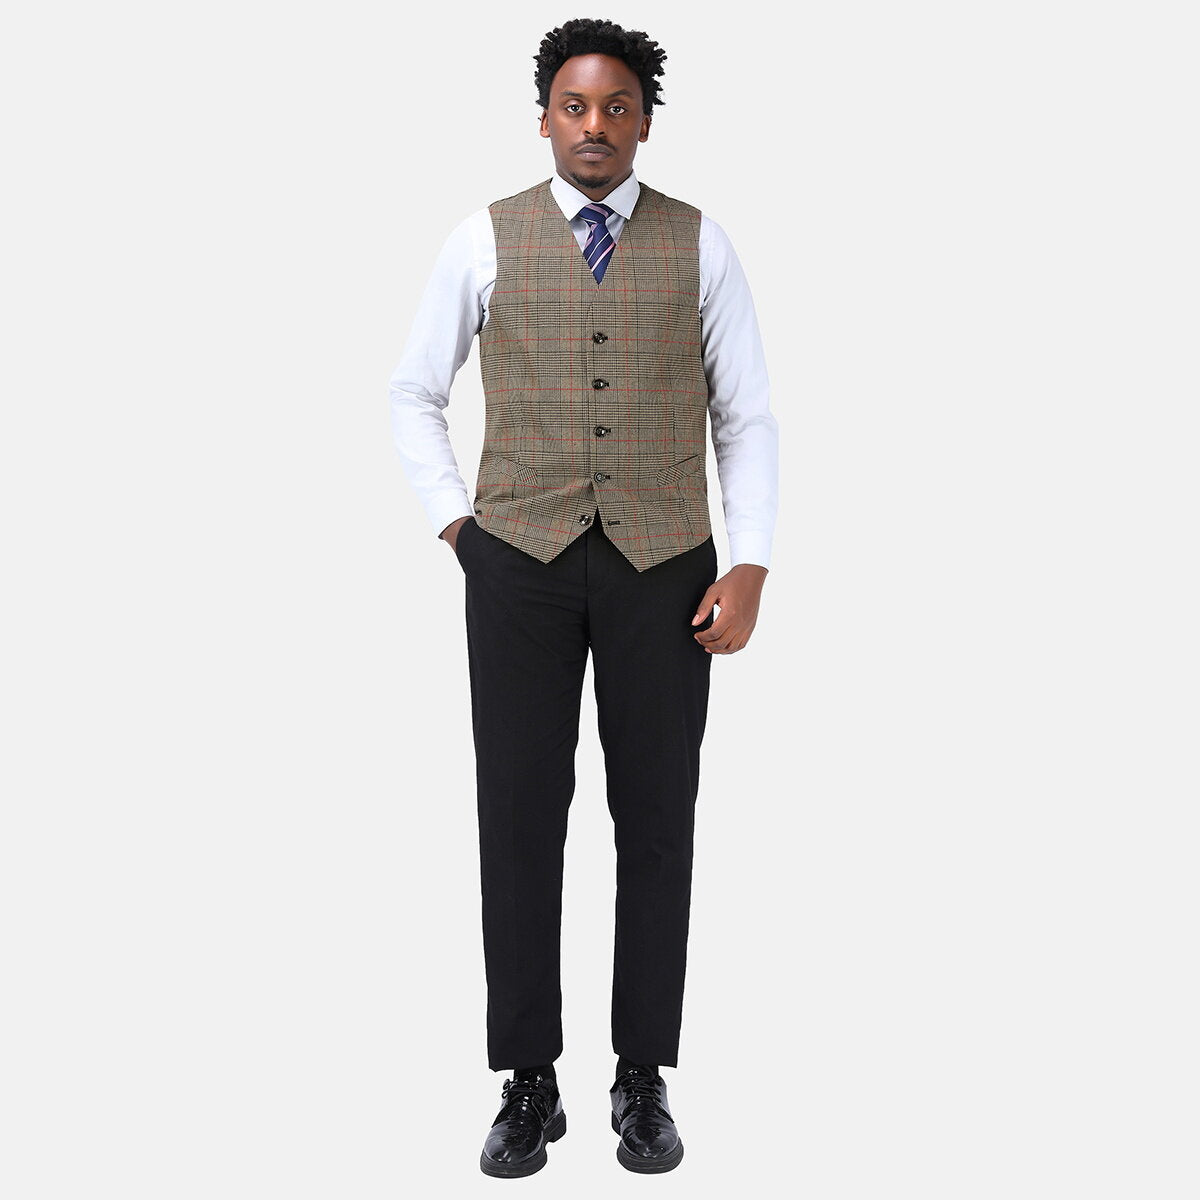 Checked Vests Stripes Business Slim Fit Cotton Grey